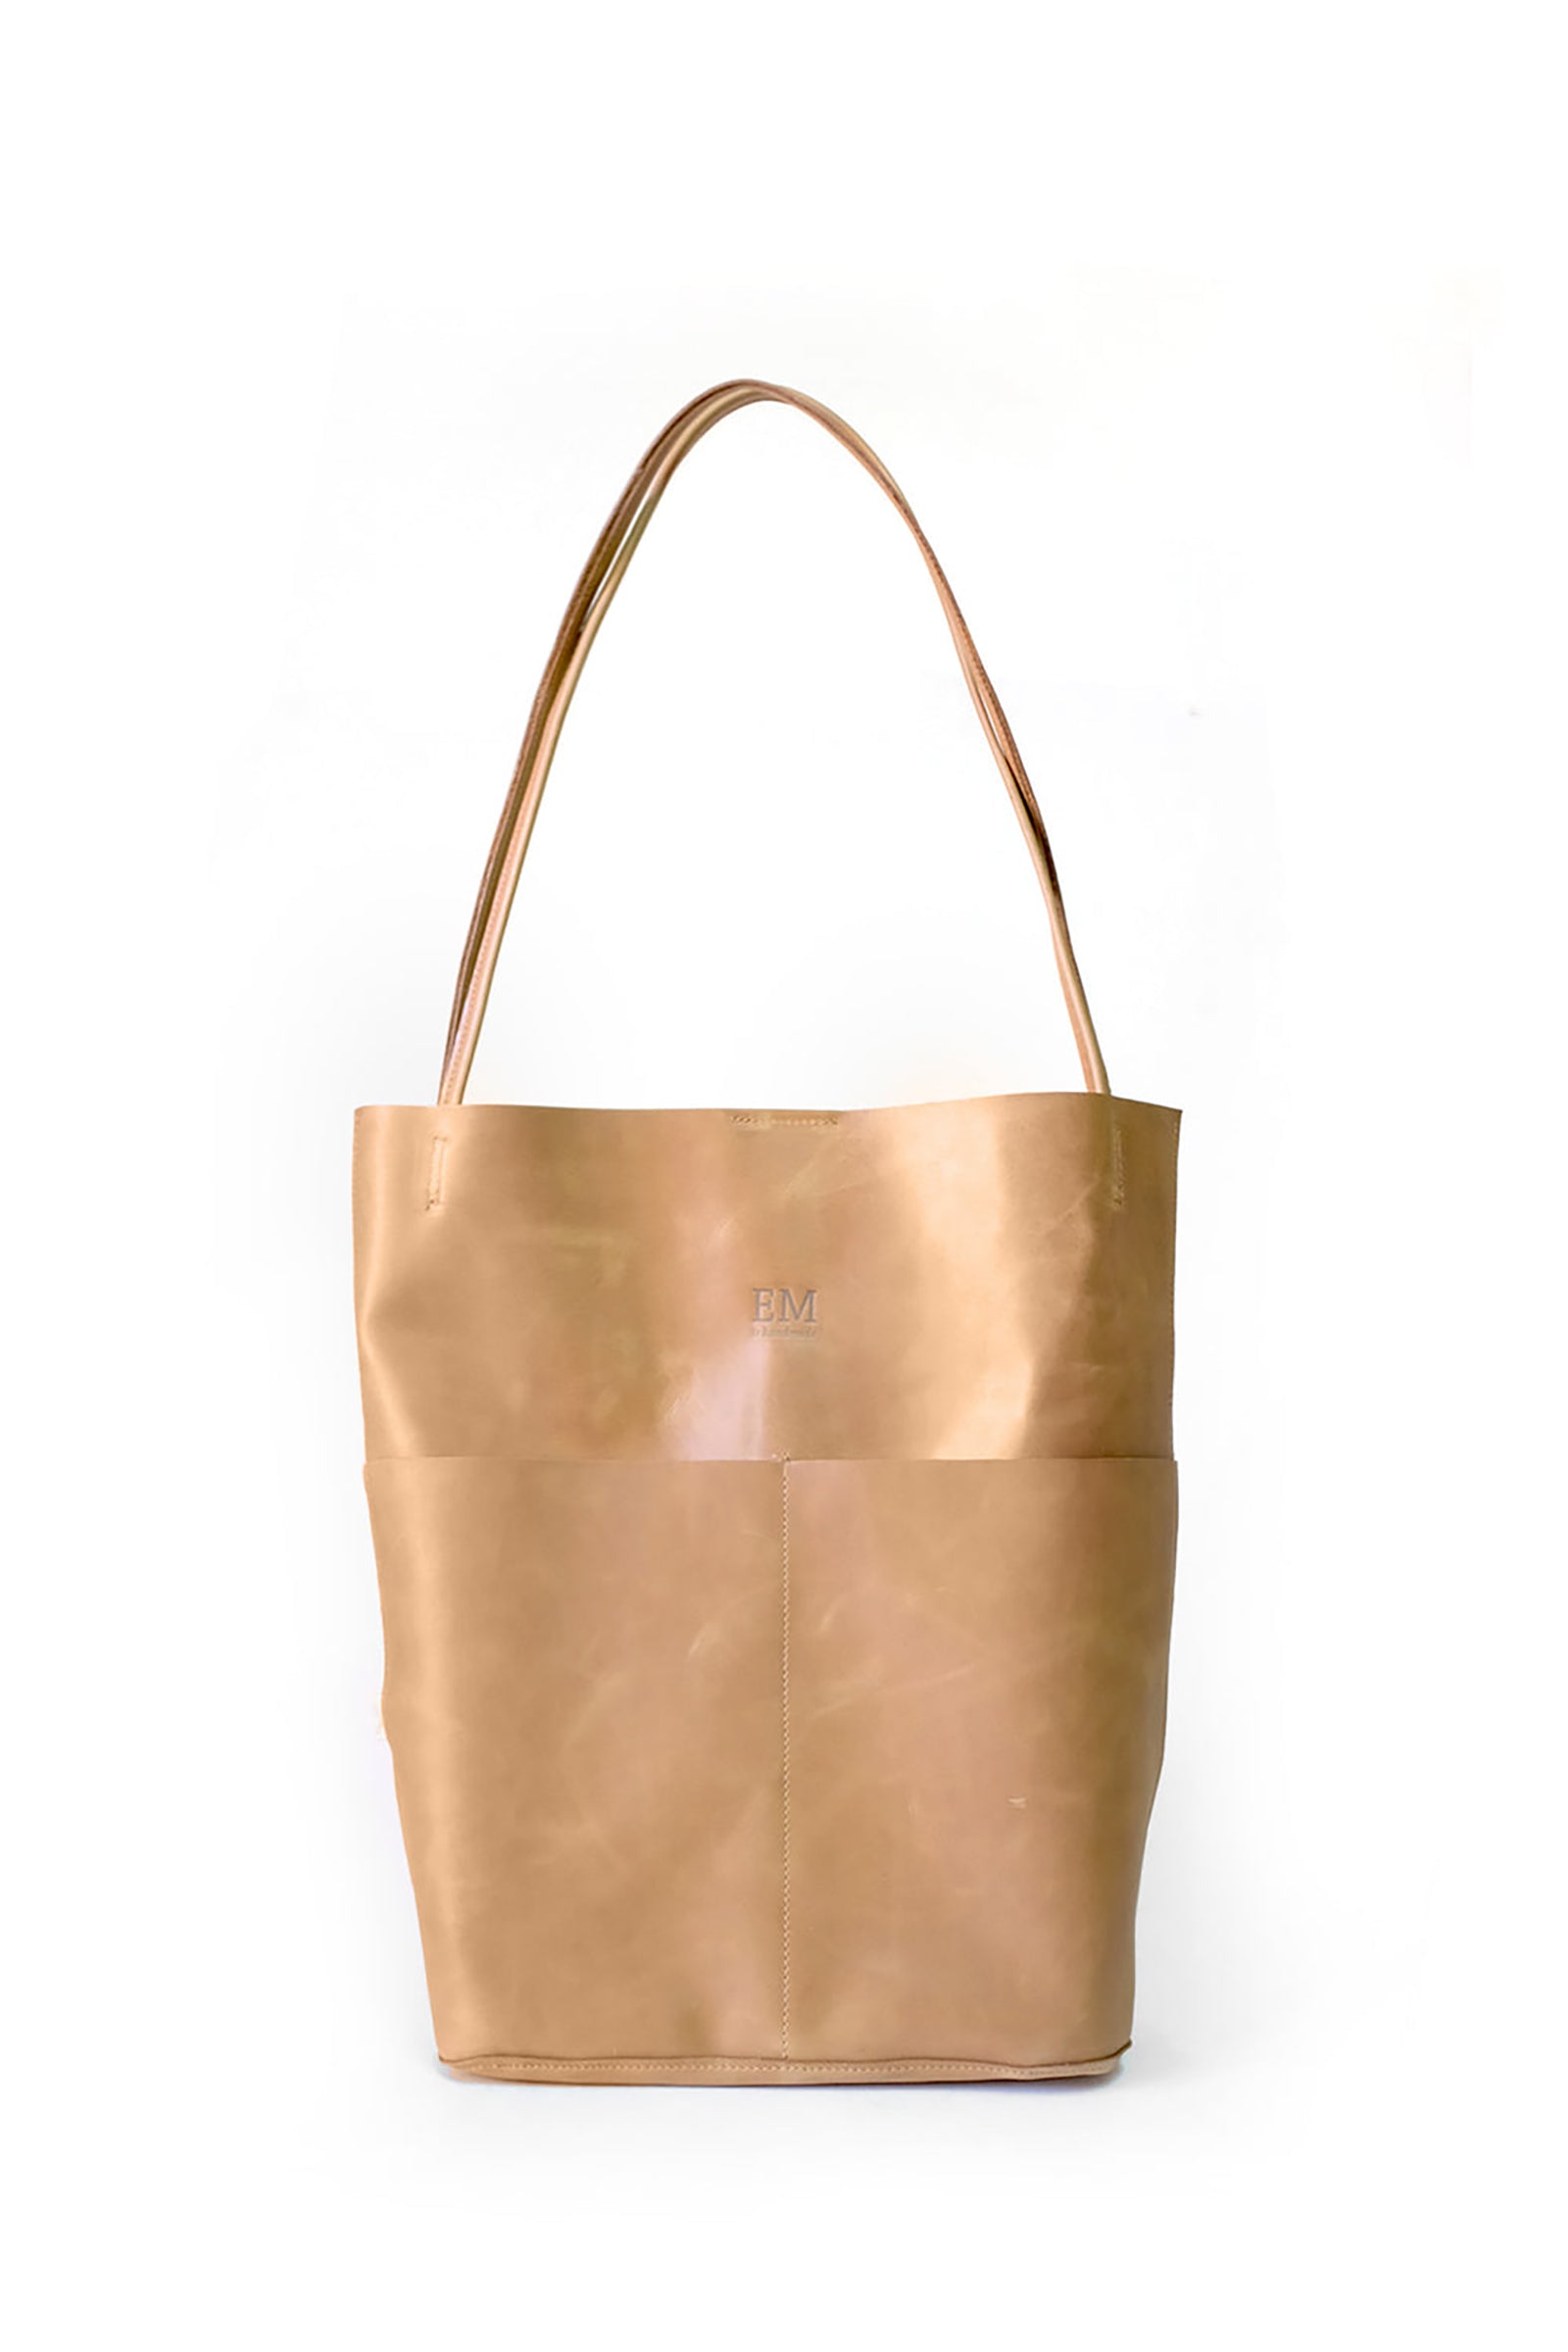 Tote N.16 Caramelo